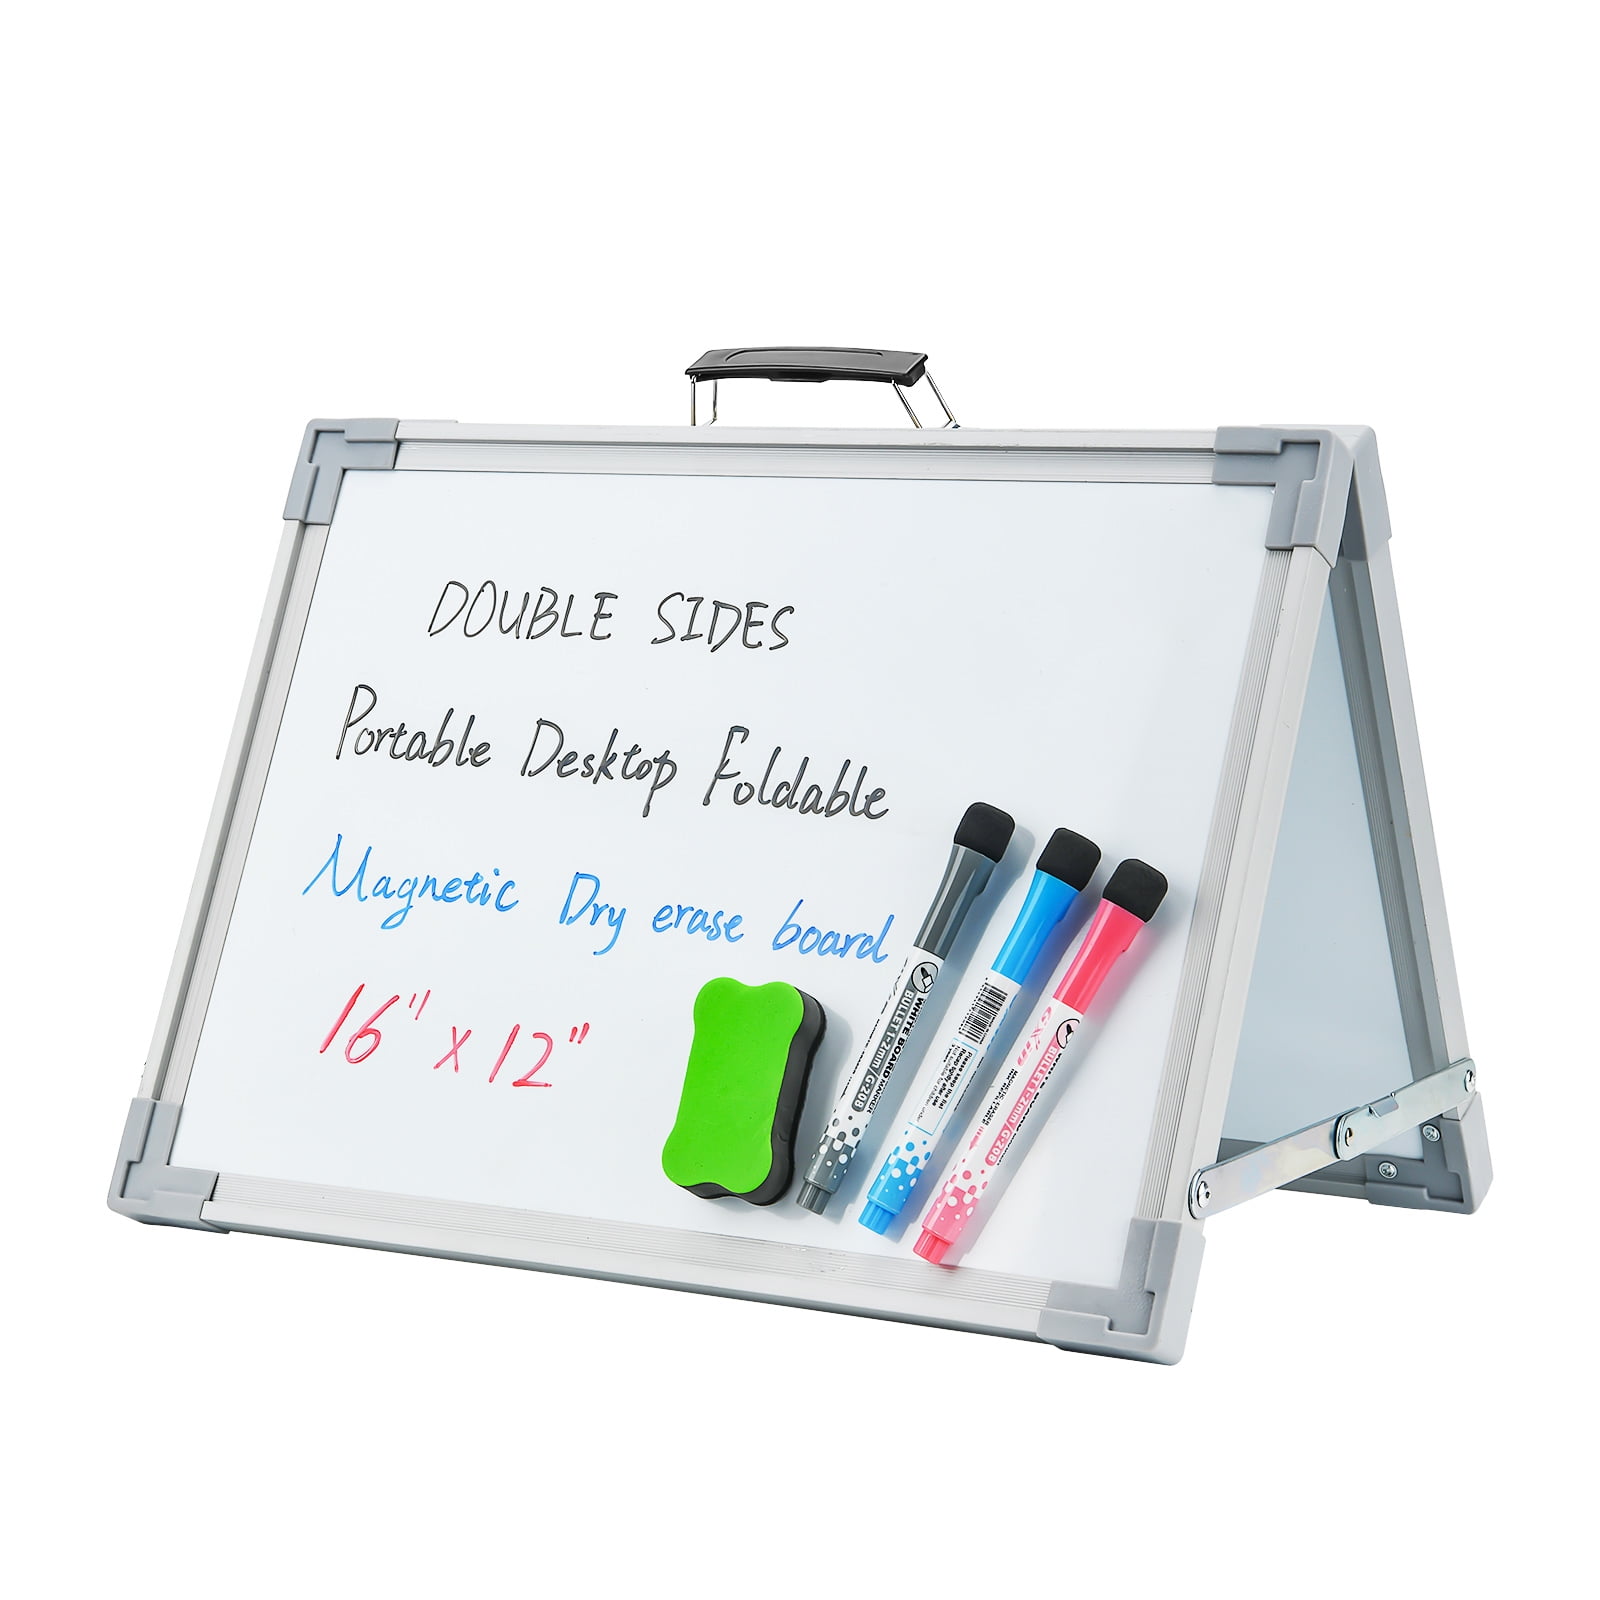 Small Dry Erase White Board 16x12 Double-Sided Magnetic Portable White Board Desktop Foldable Tabletop Whiteboard Easel for Home, Office, Classroom